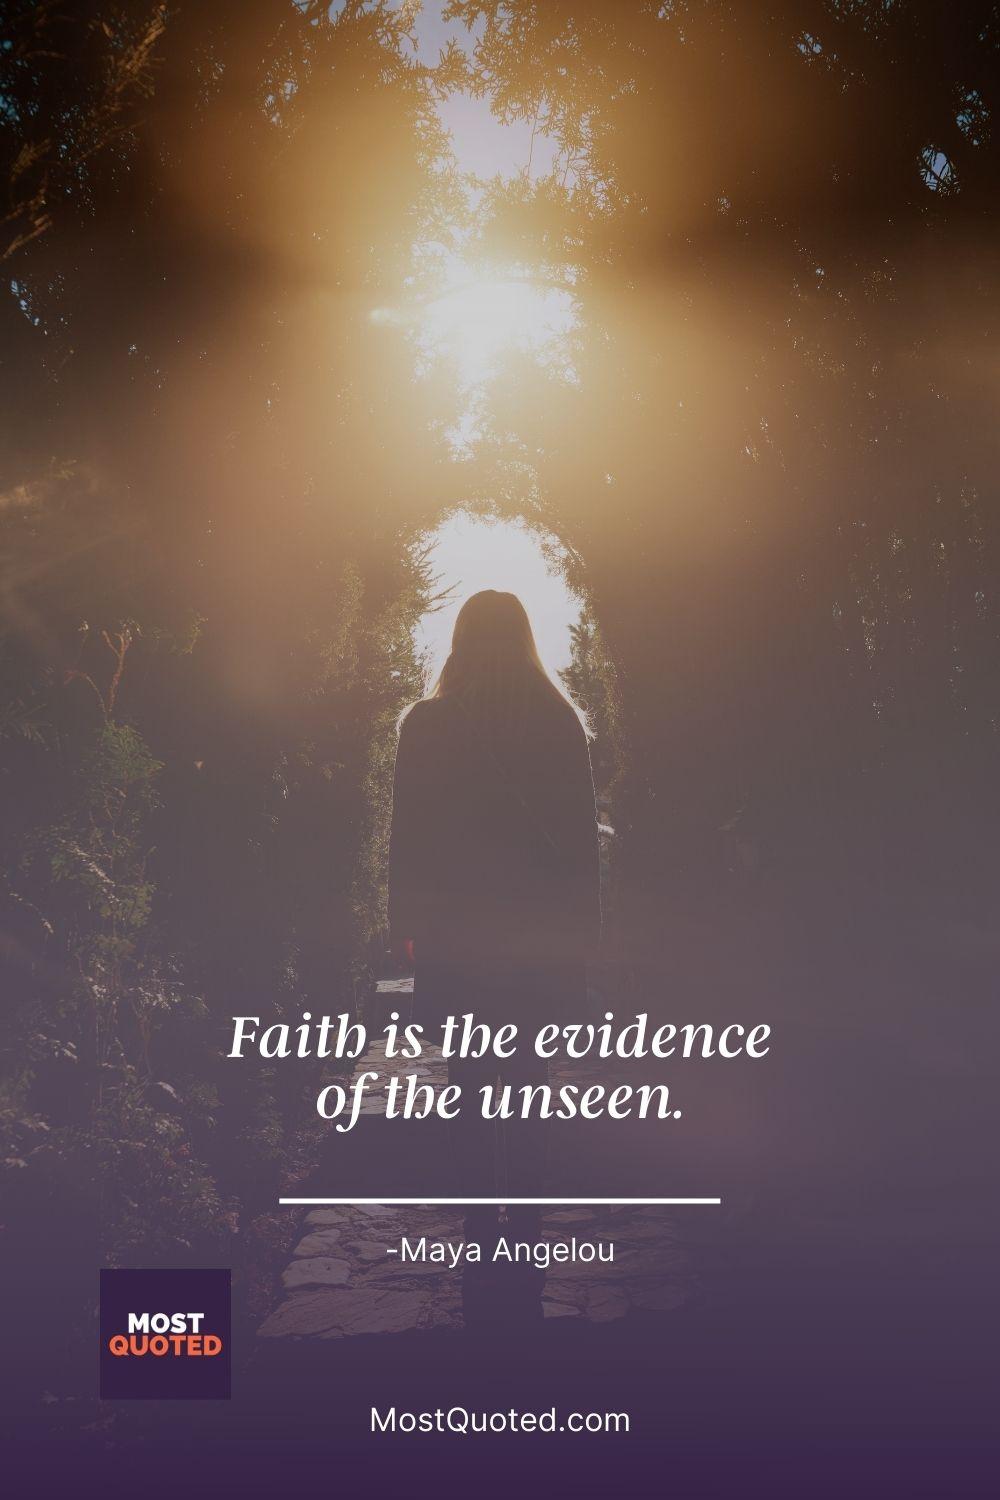 Faith is the evidence of the unseen. - Maya Angelou